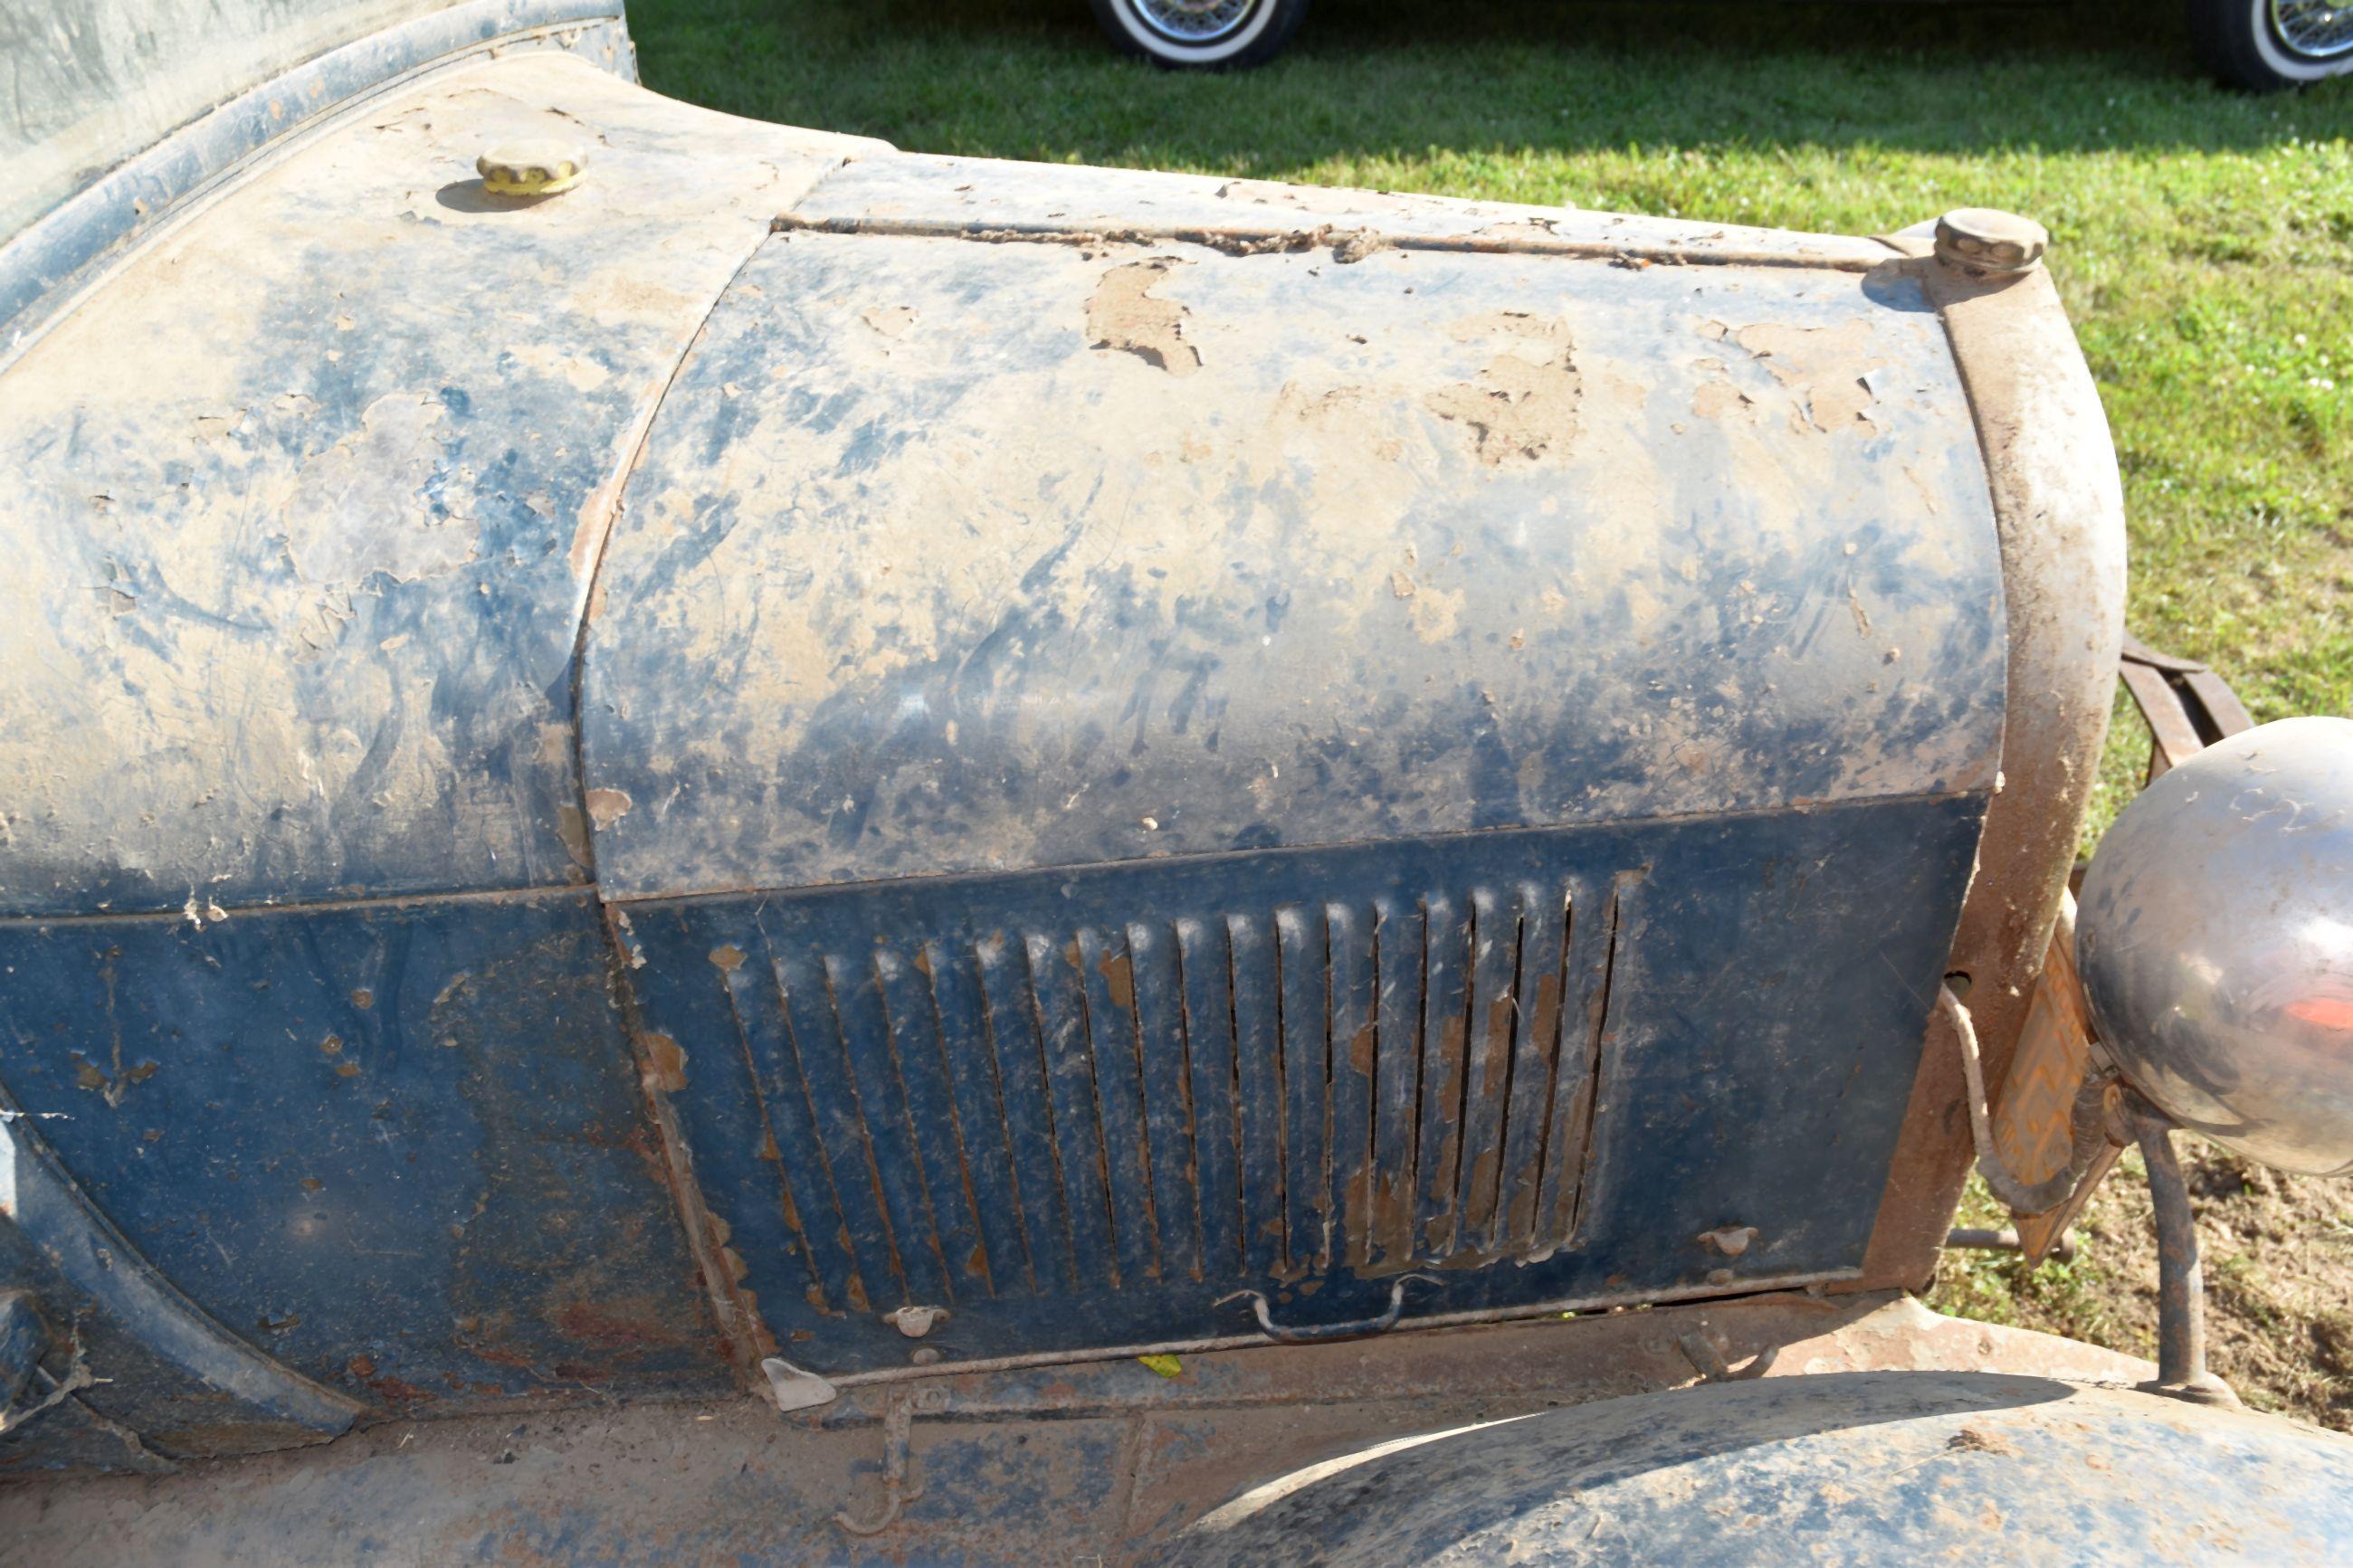 1929 Ford Model A, 2 Door Sedan, Poor Top,Non-Running, All Tires Are Bad, Has Been Sitting For Many